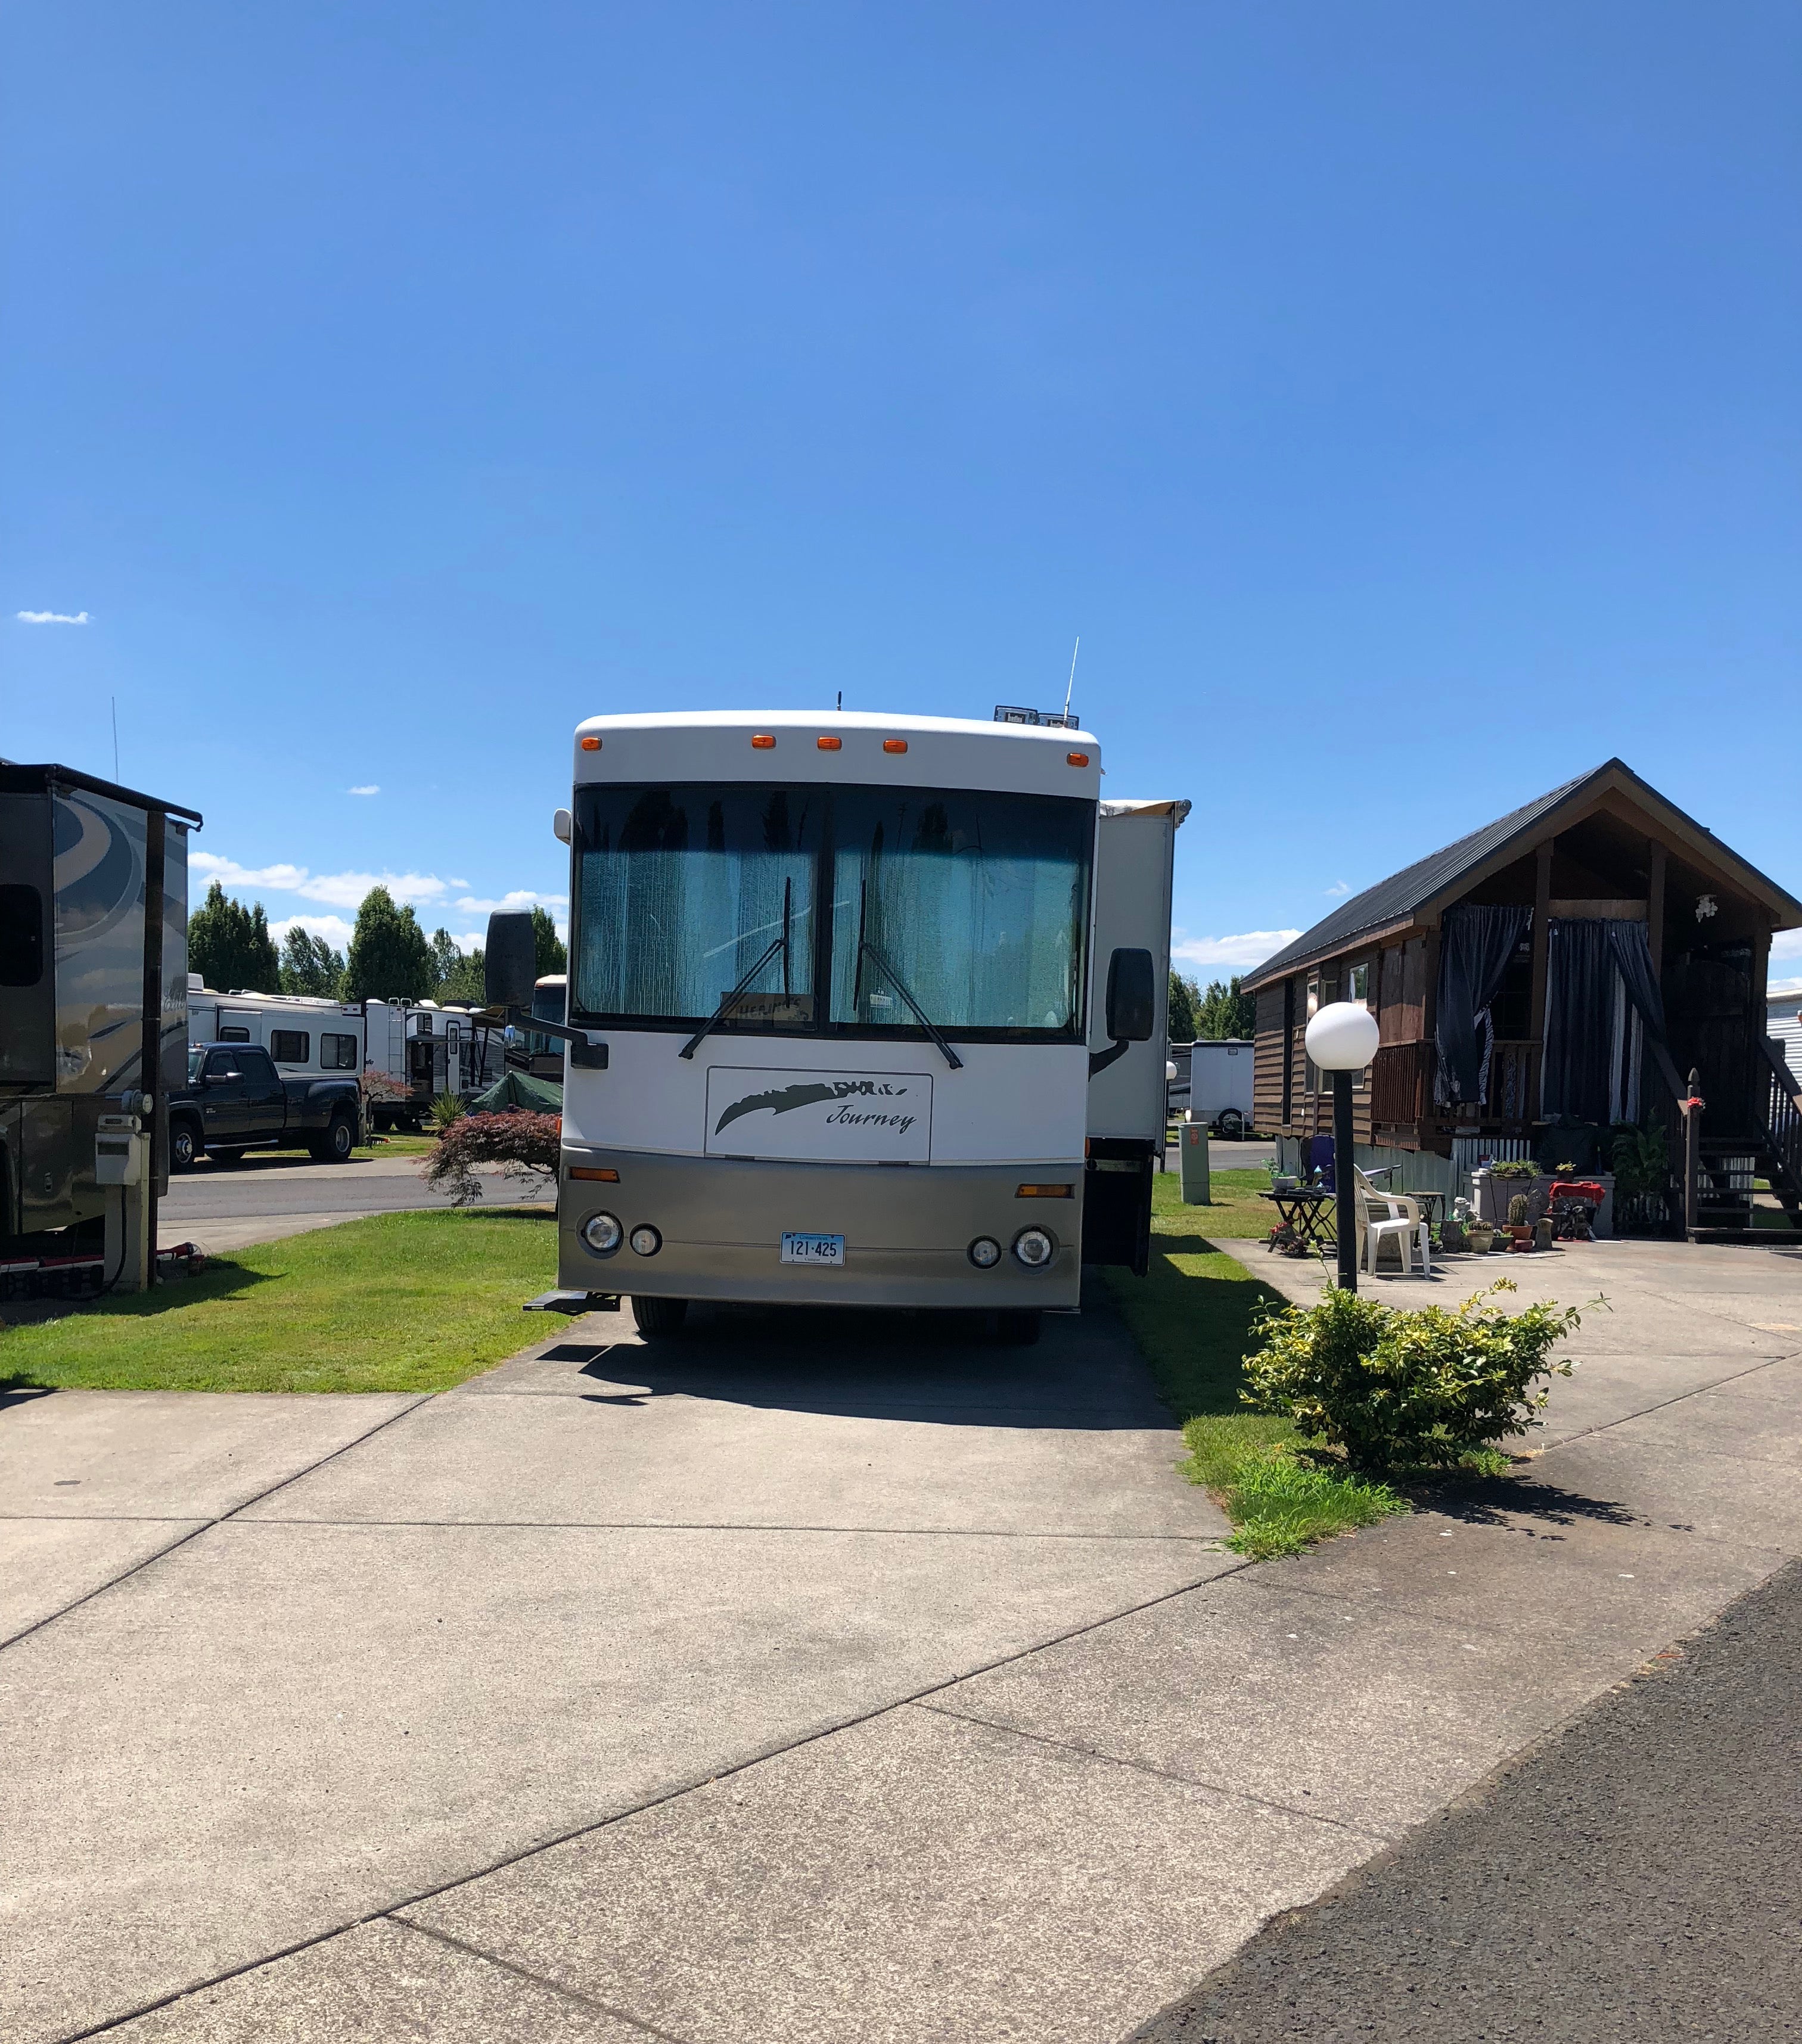 RV plus tiny house on right.